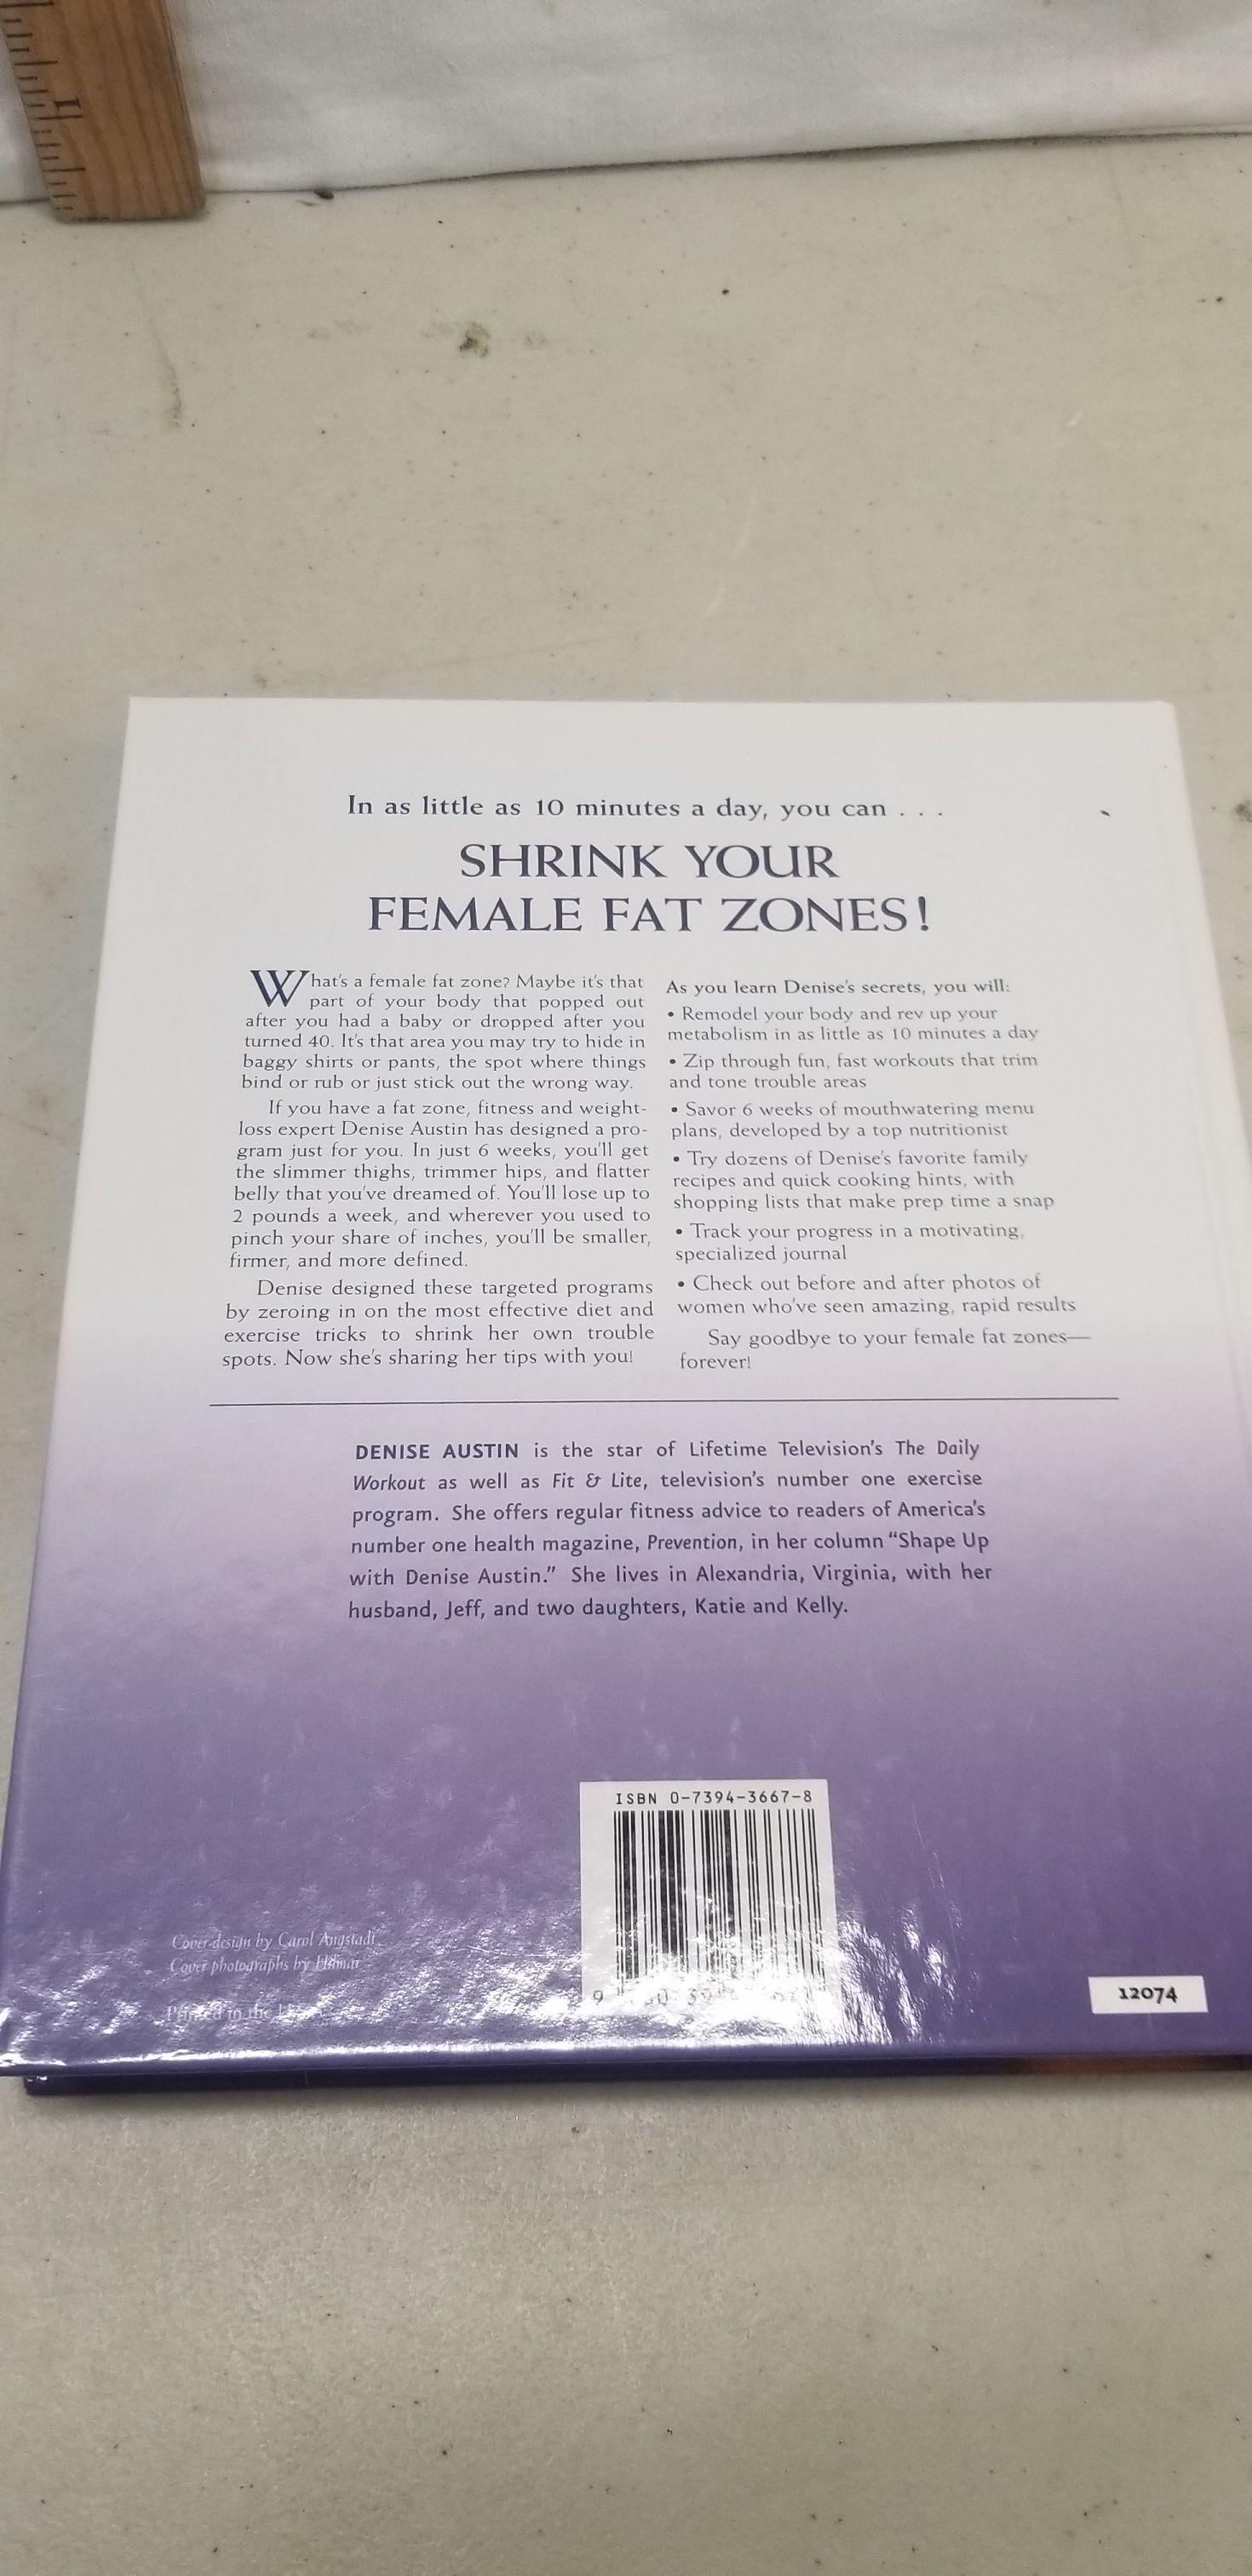 Books, Shrink Your Female Fat Zones